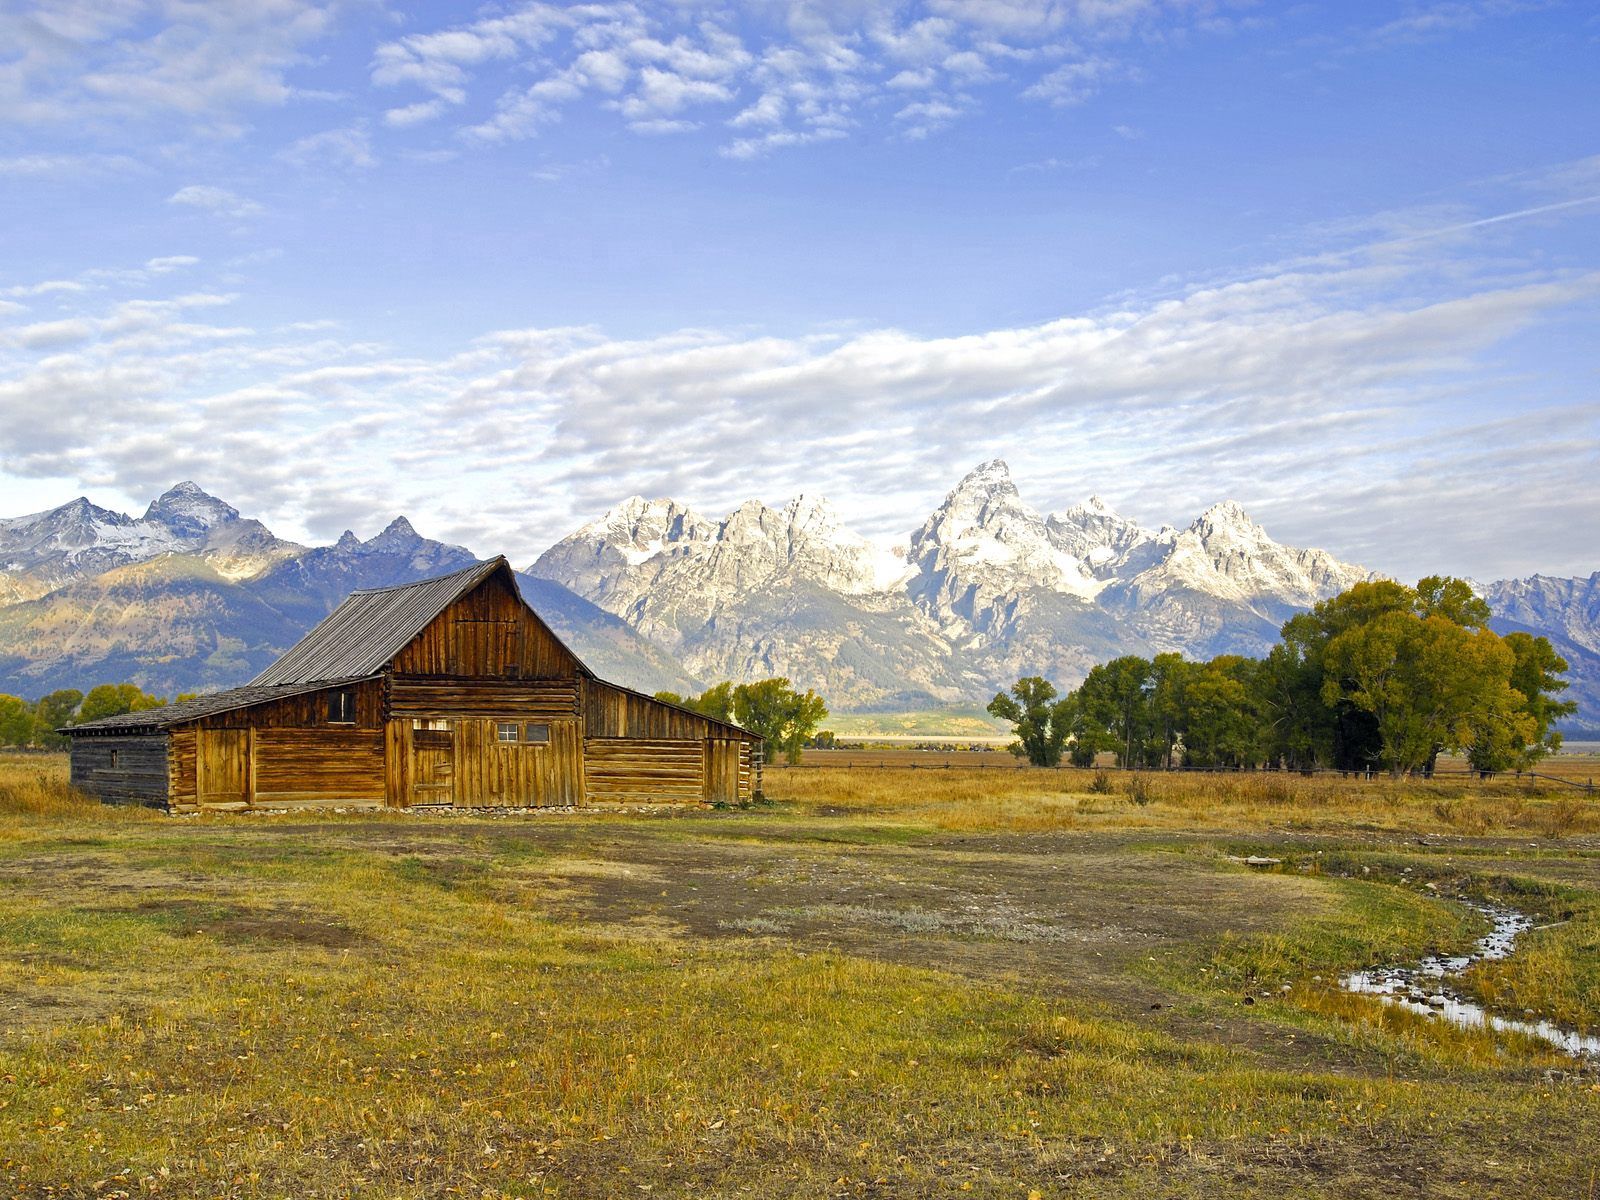 wyoming, wooden, nature, wood, house, field